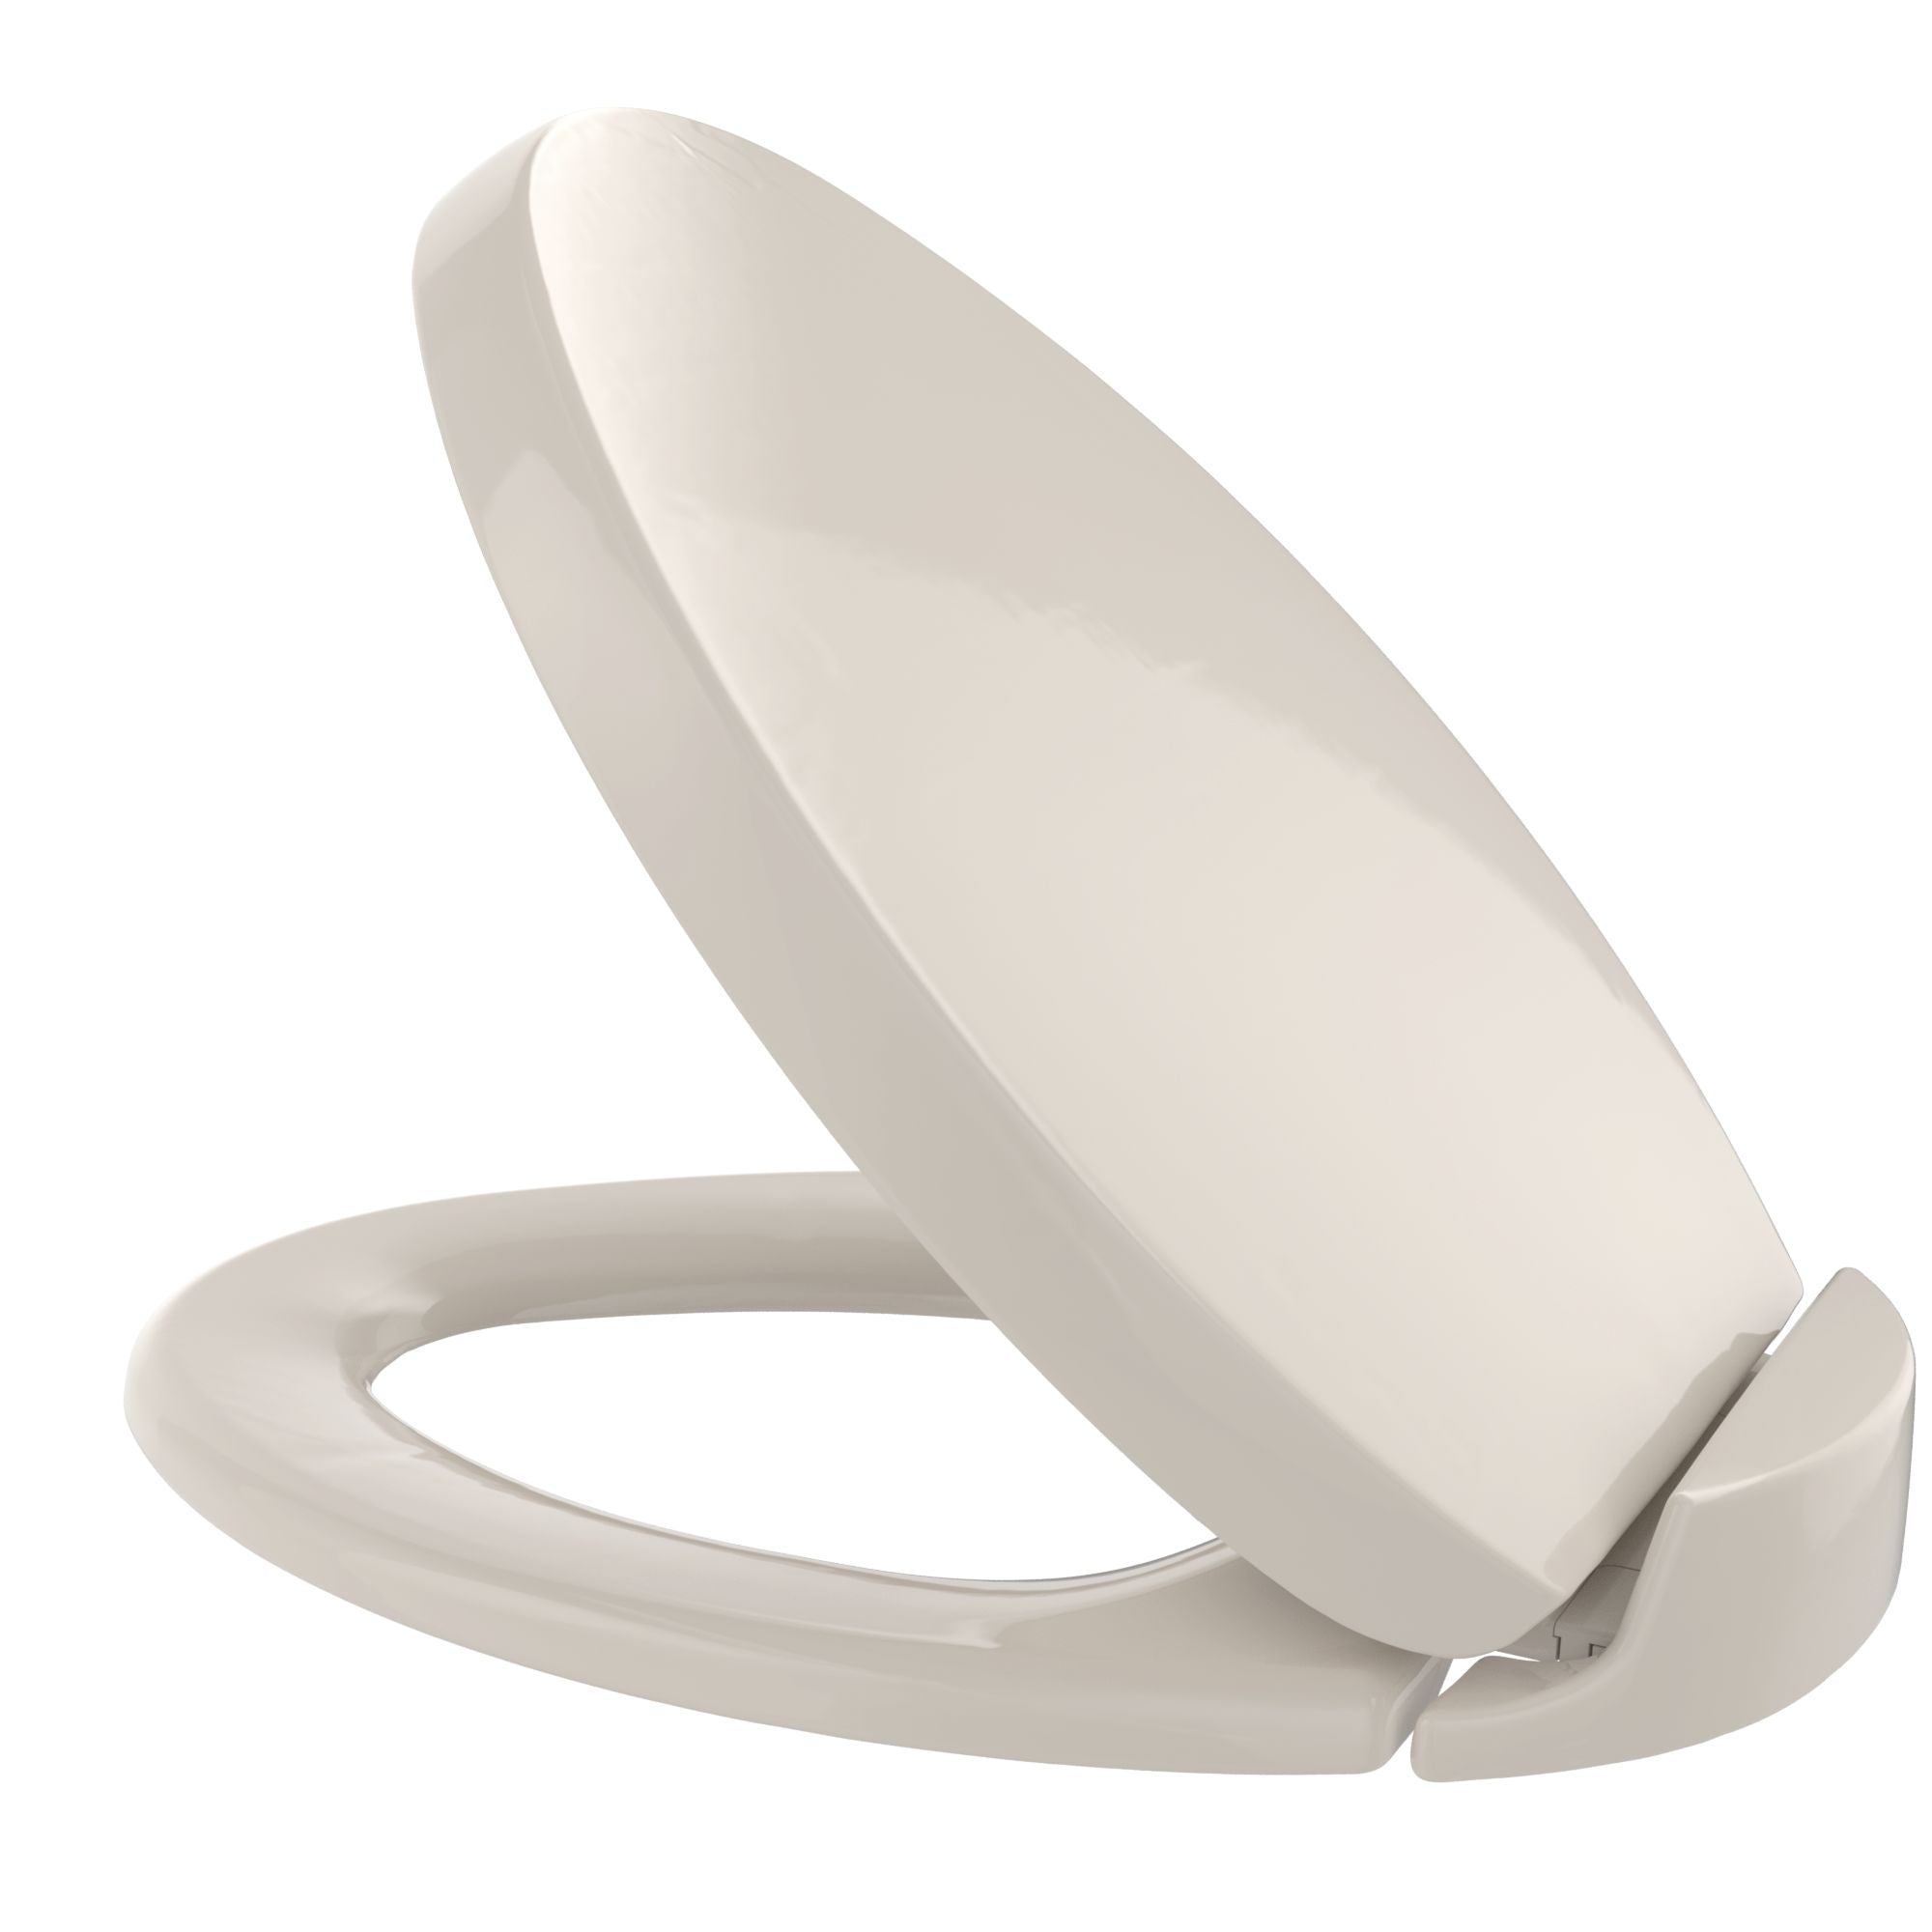 Toto Oval Softclose Toilet Seat - Elongated